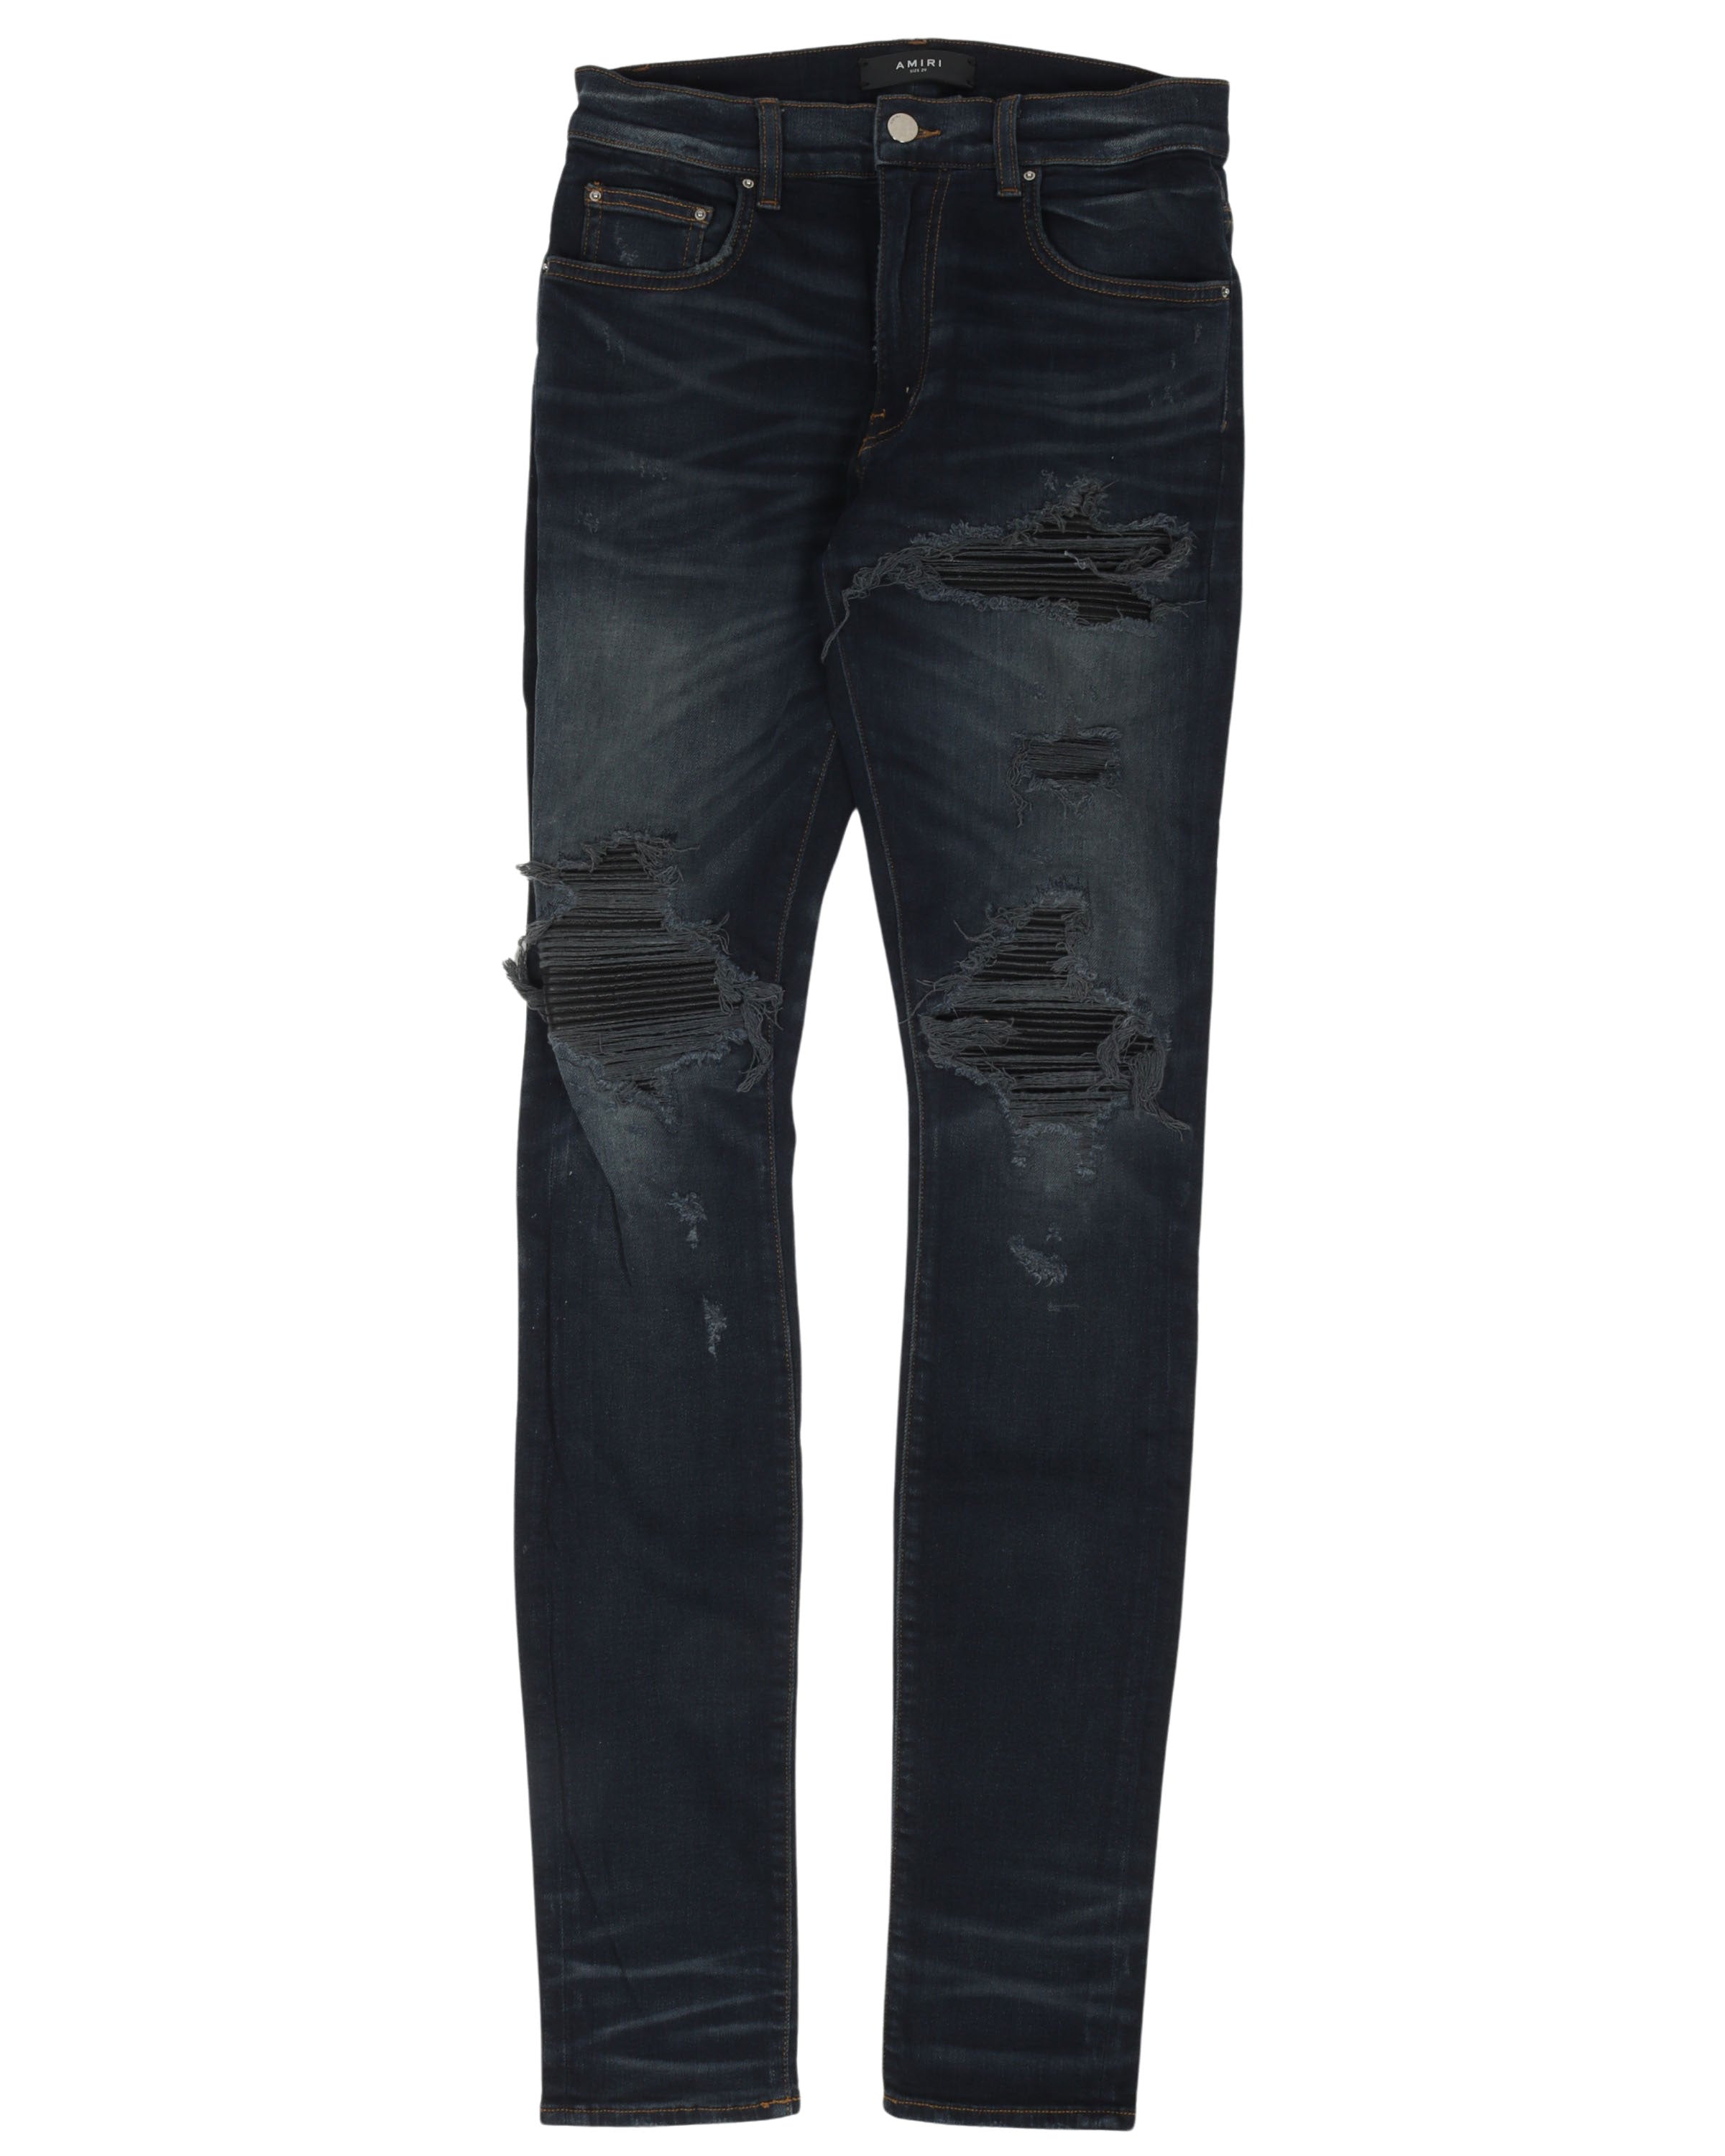 Amiri Knee Rip Patched Jeans